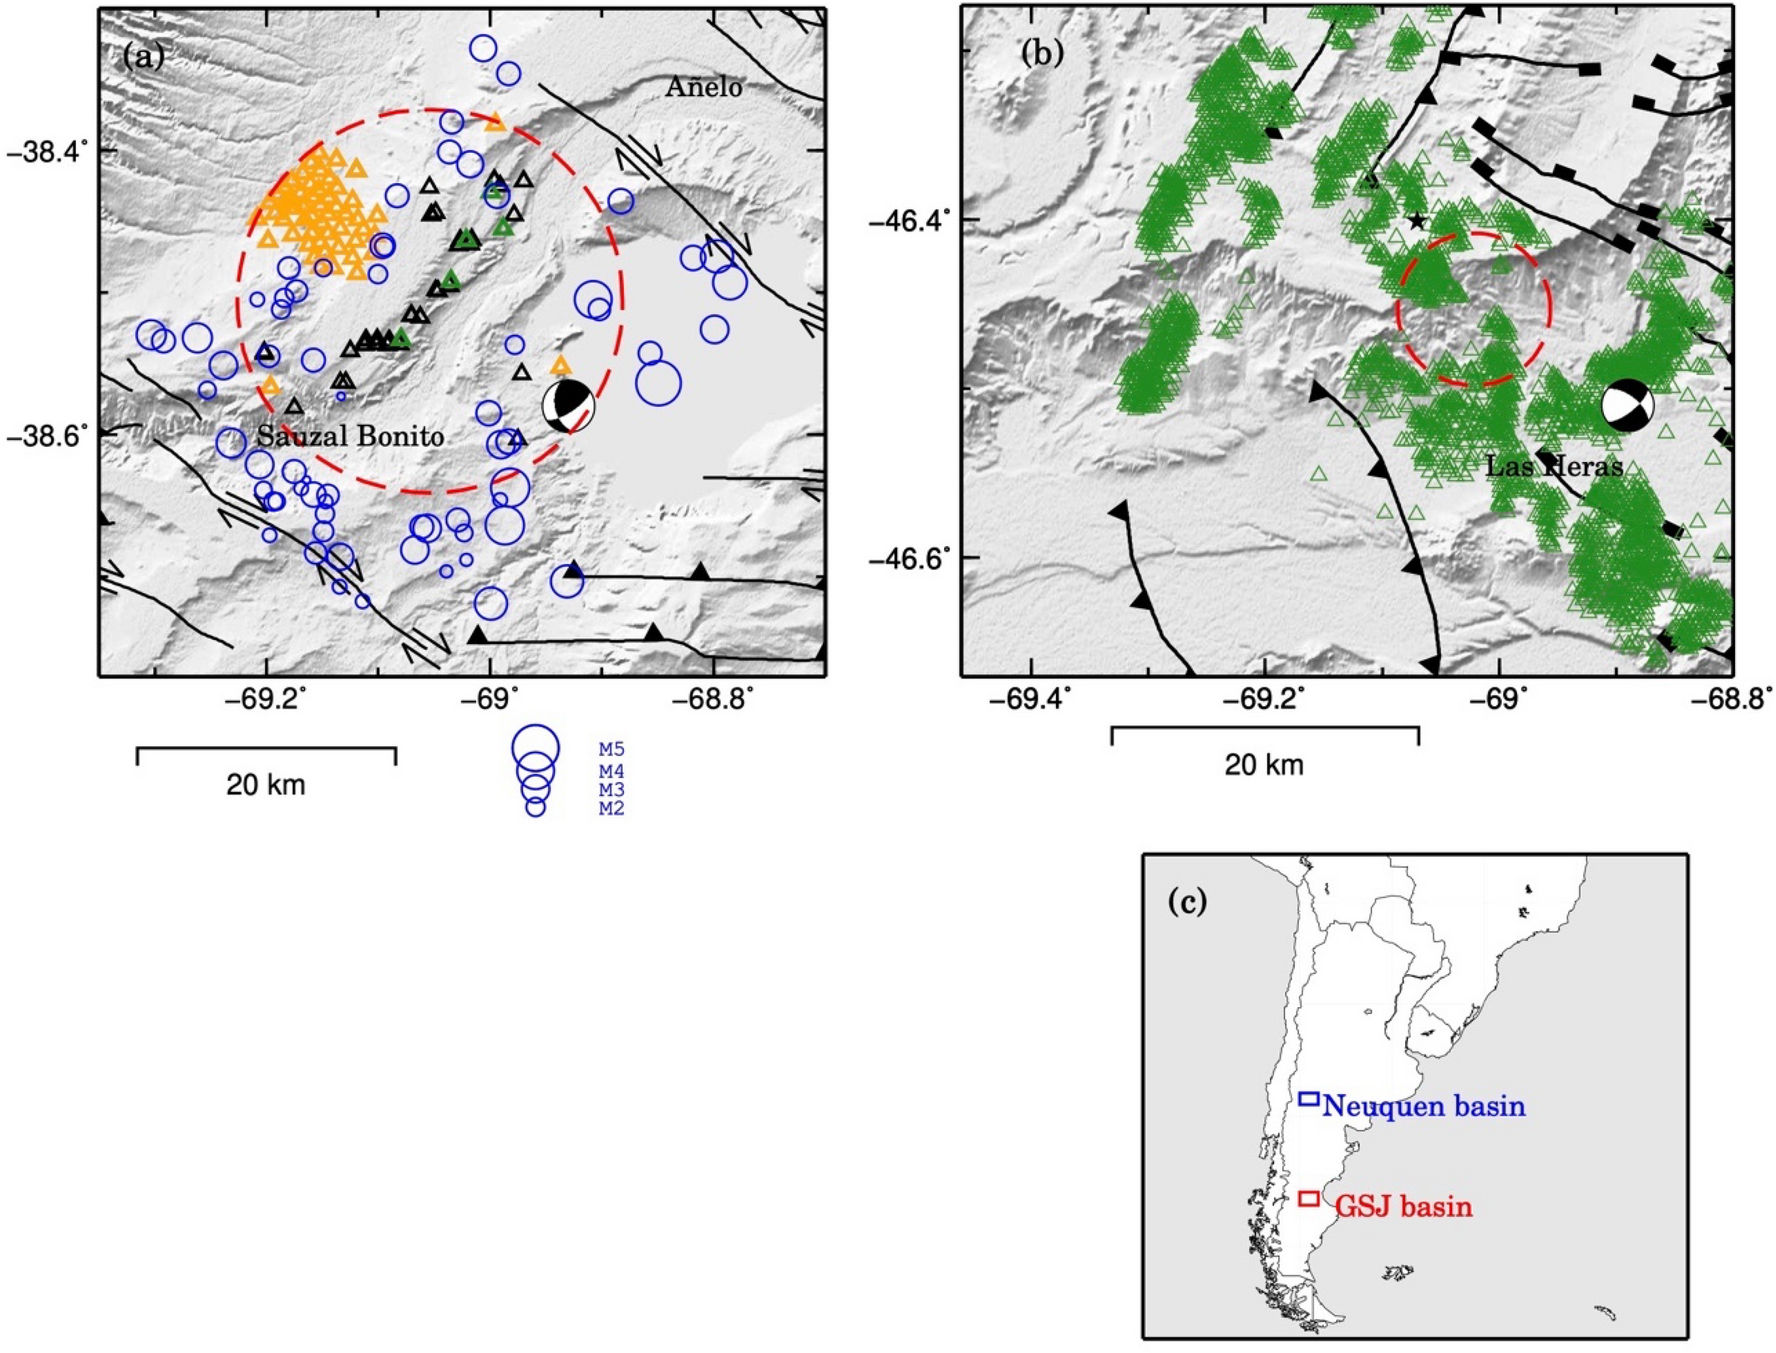 Assessment of ground deformation and seismicity in two areas of intense  hydrocarbon production in the Argentinian Patagonia